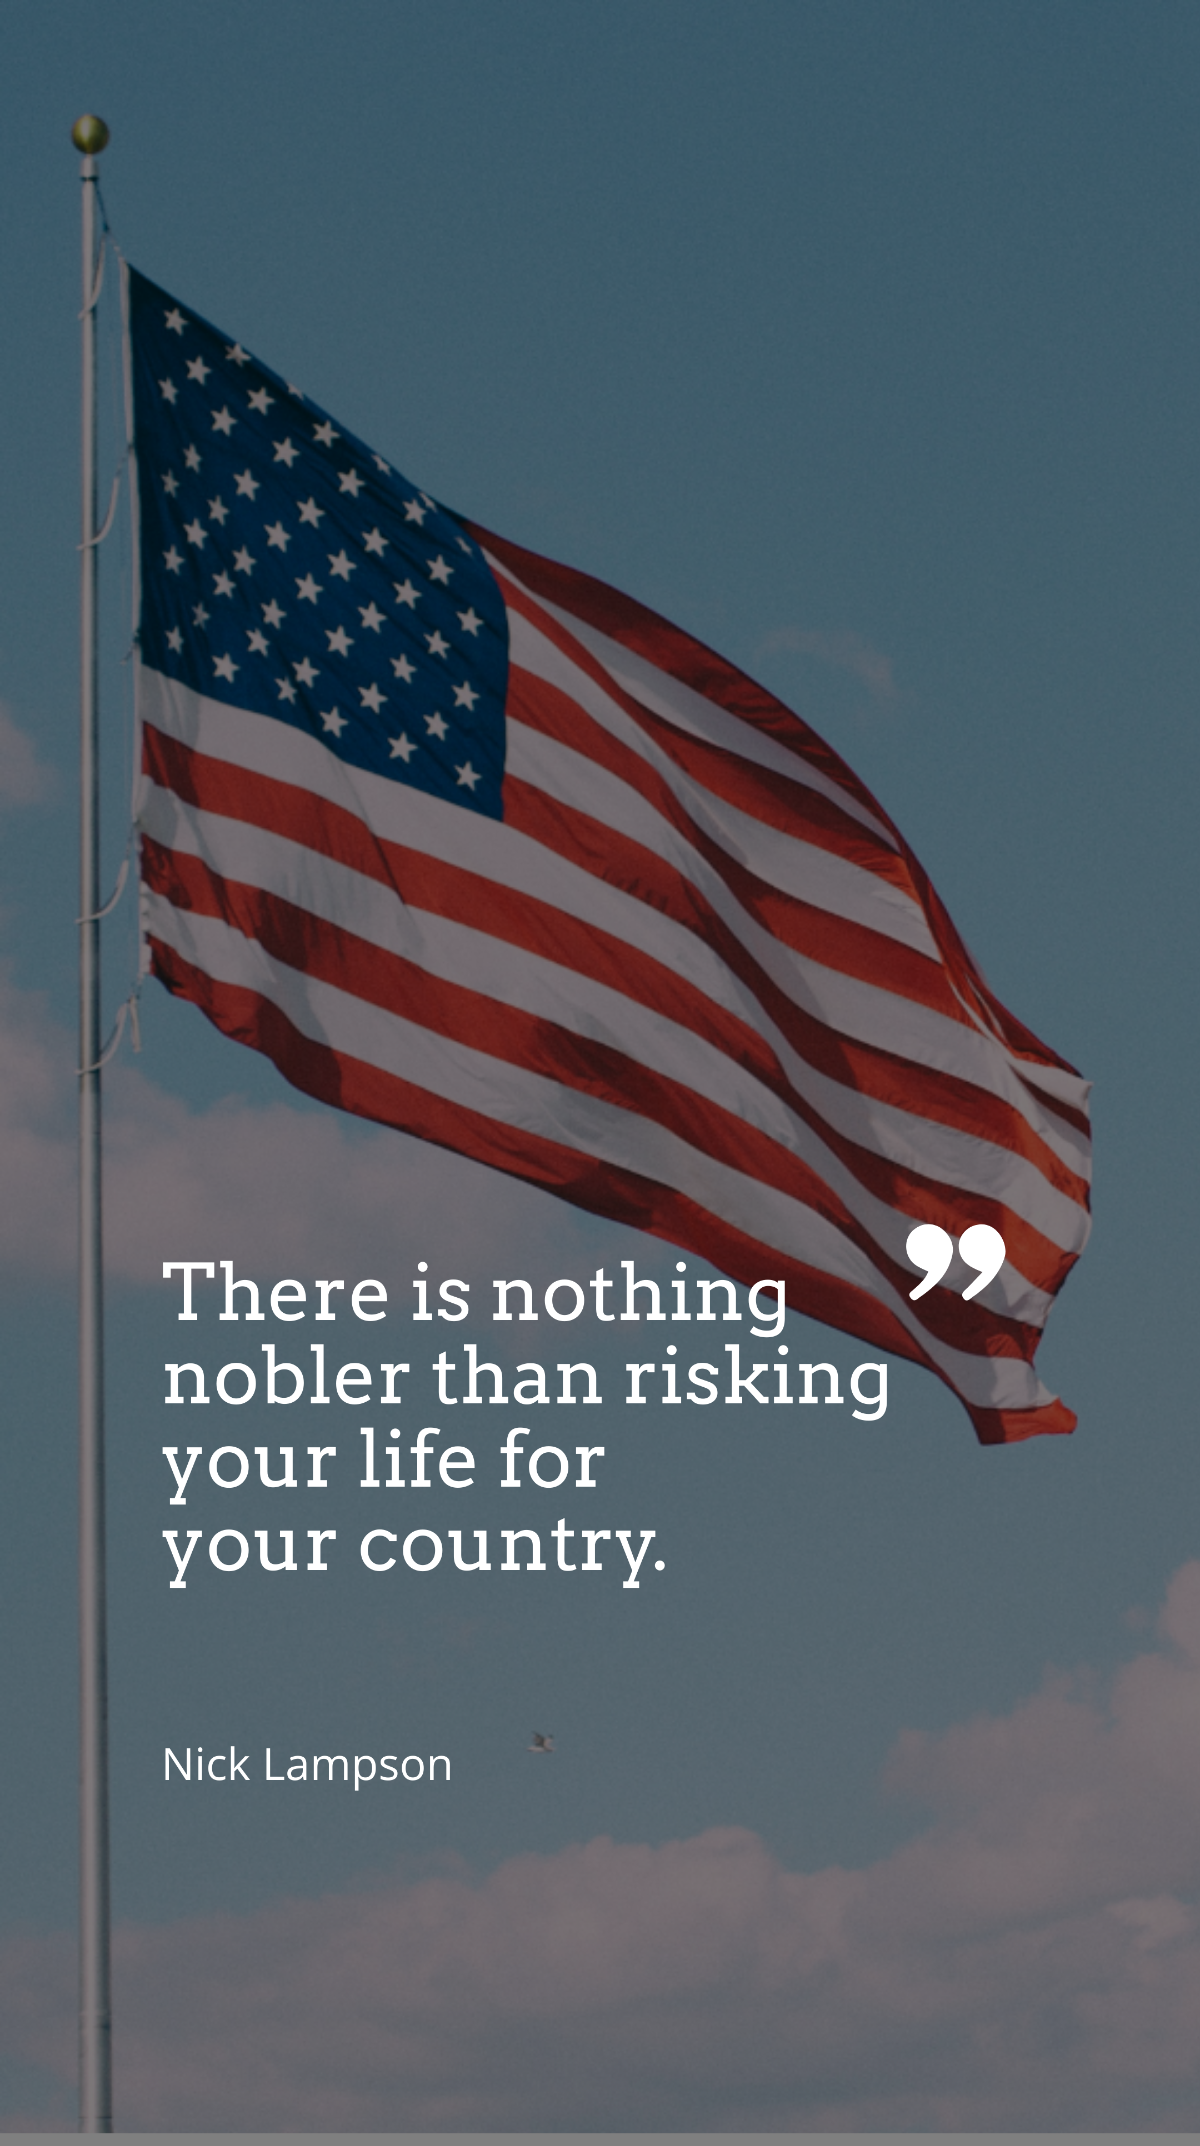 Nick Lampson - There is nothing nobler than risking your life for your country.